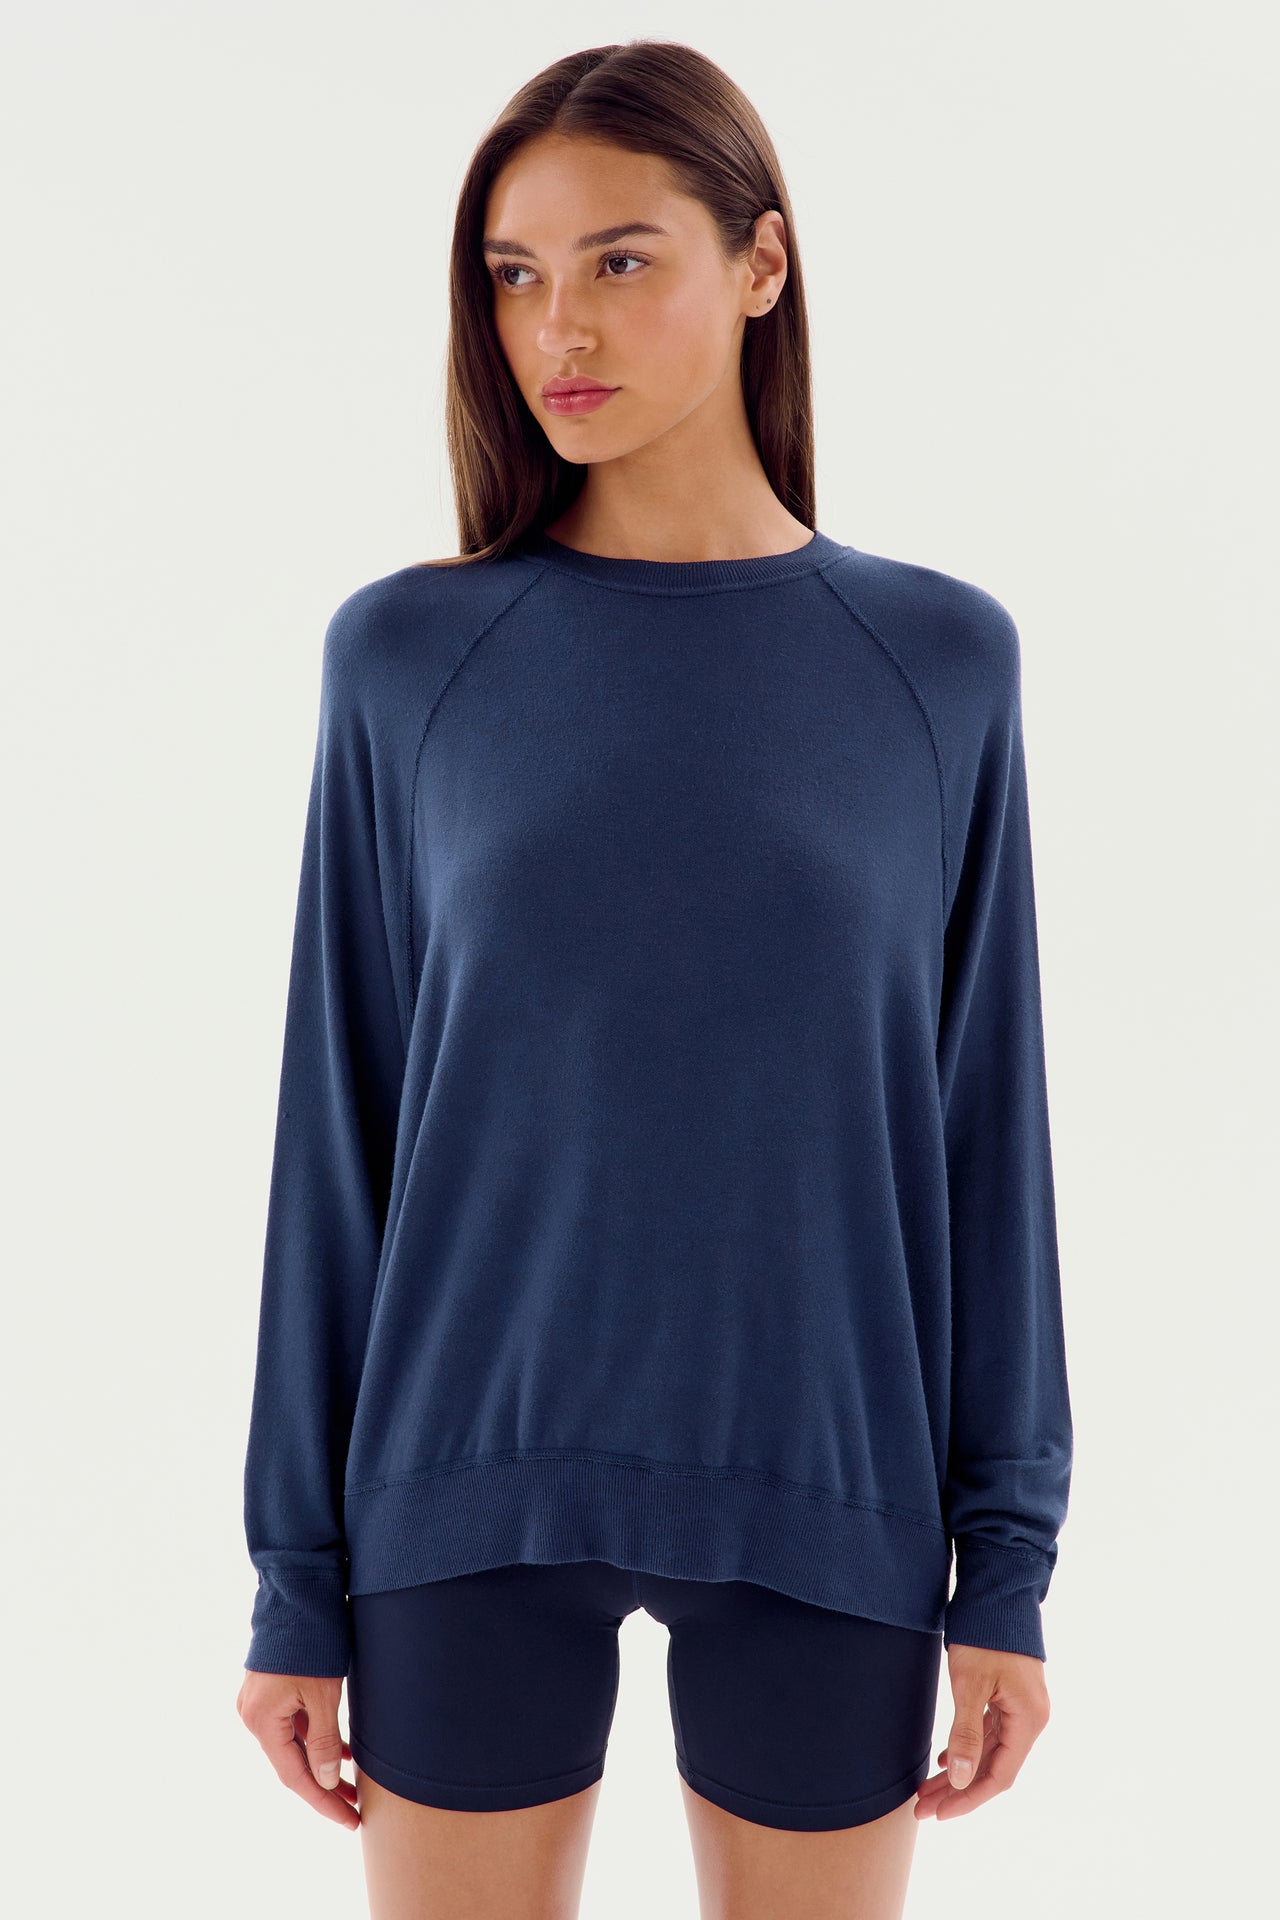 A person wearing the Andie Fleece Sweatshirt - Indigo by SPLITS59 and black shorts stands against a plain white background.